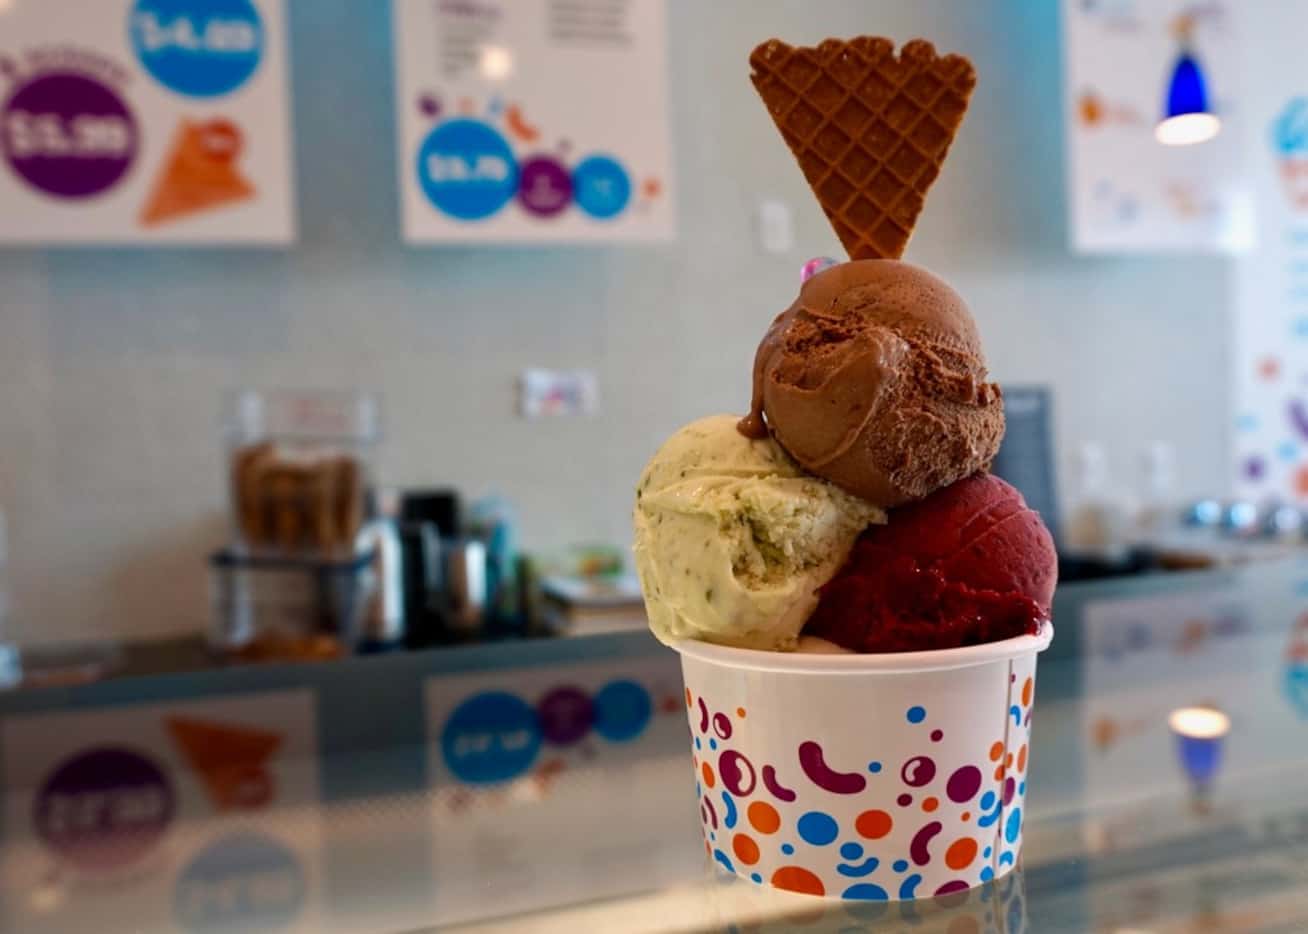 No matter what the flavor, The Gelato Cone encourages all customers to pile it on. Here are...